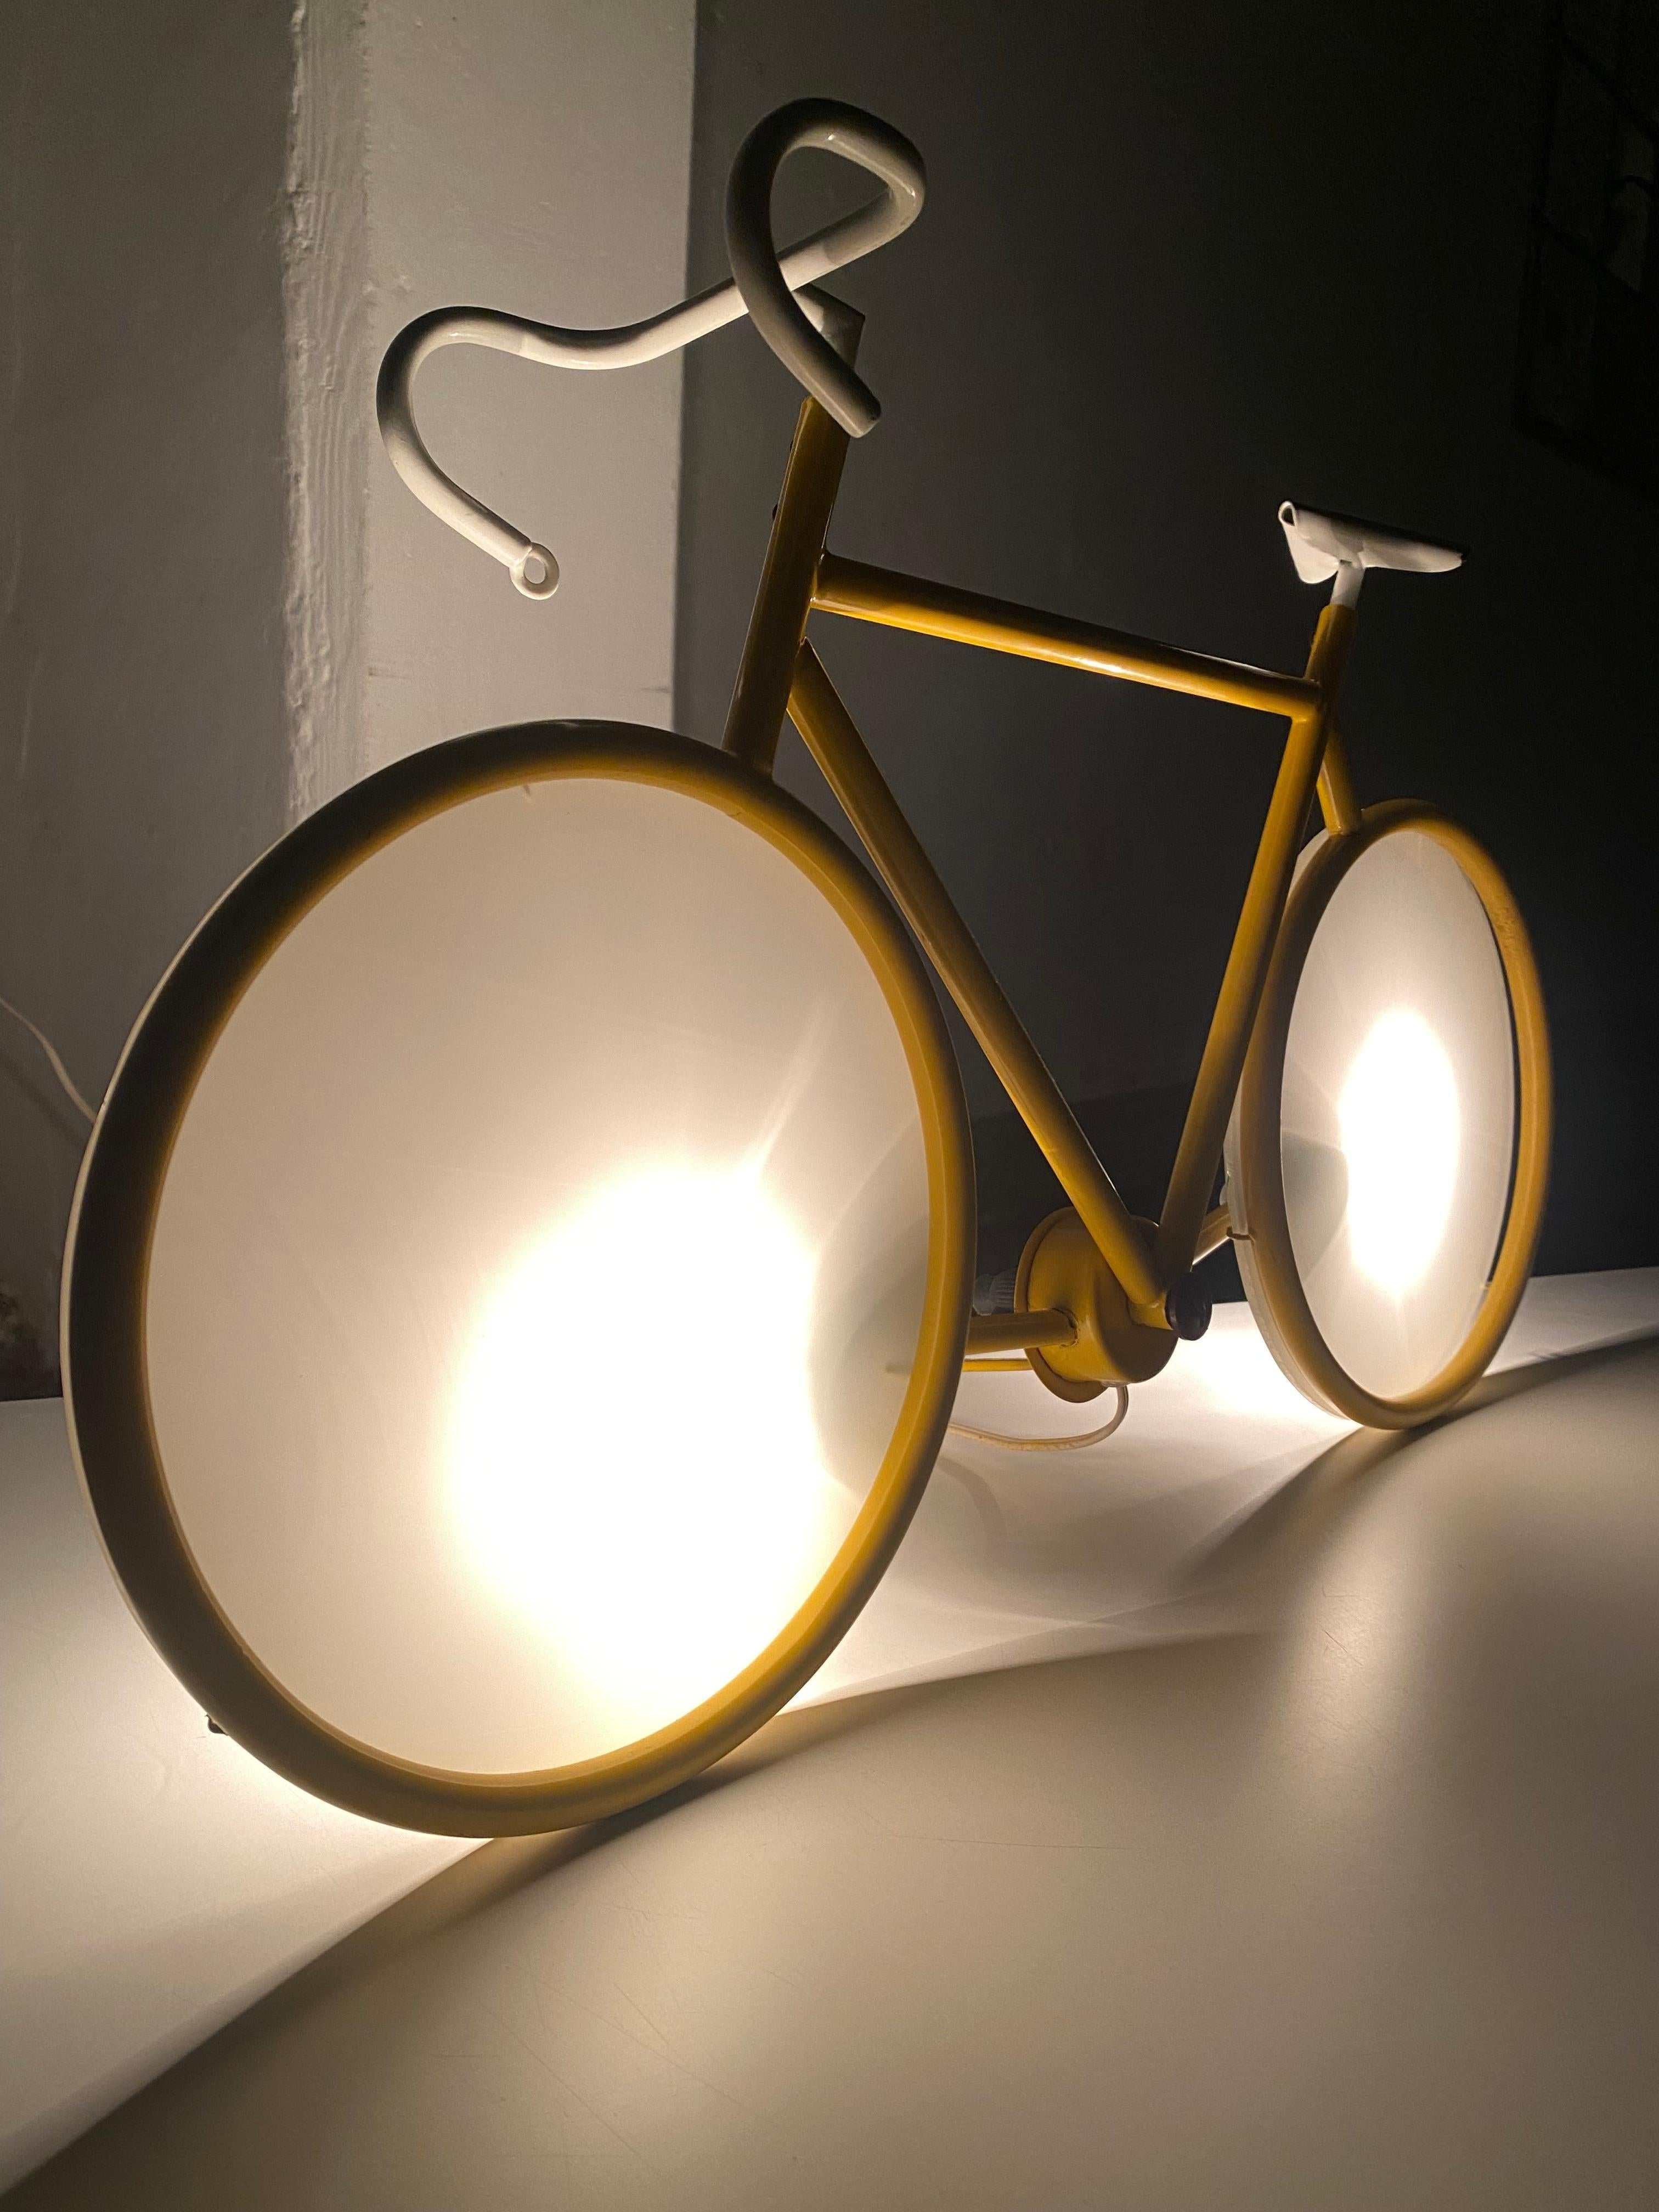 Yellow Pop Art Racing Bicycle Wall or Table Lamp by Zicoli, Italy, 1970's For Sale 2